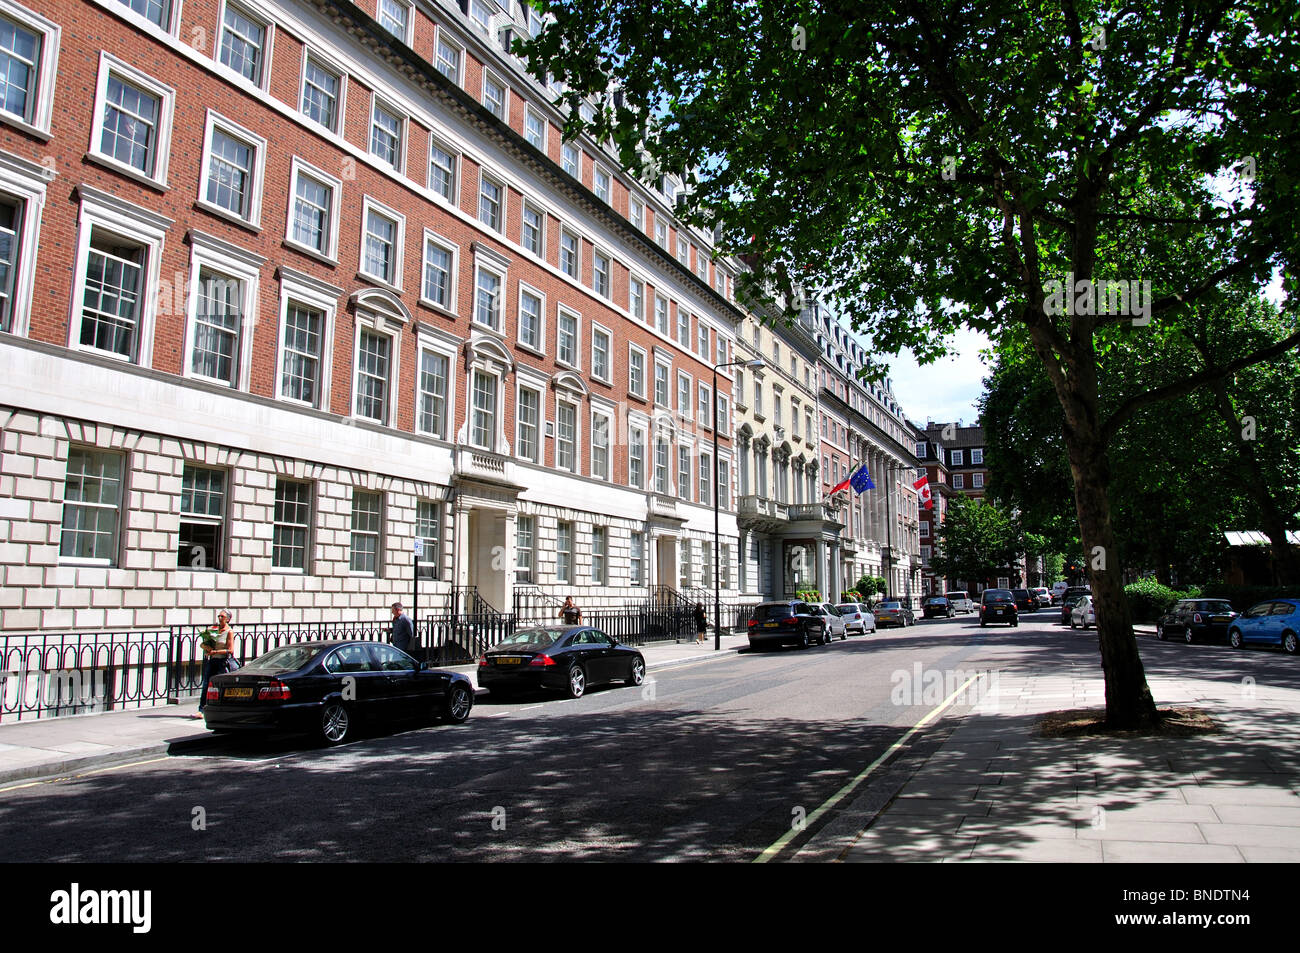 Grosvenor Square, Mayfair, West End, City of Westminster, London, England, United Kingdom Stock Photo